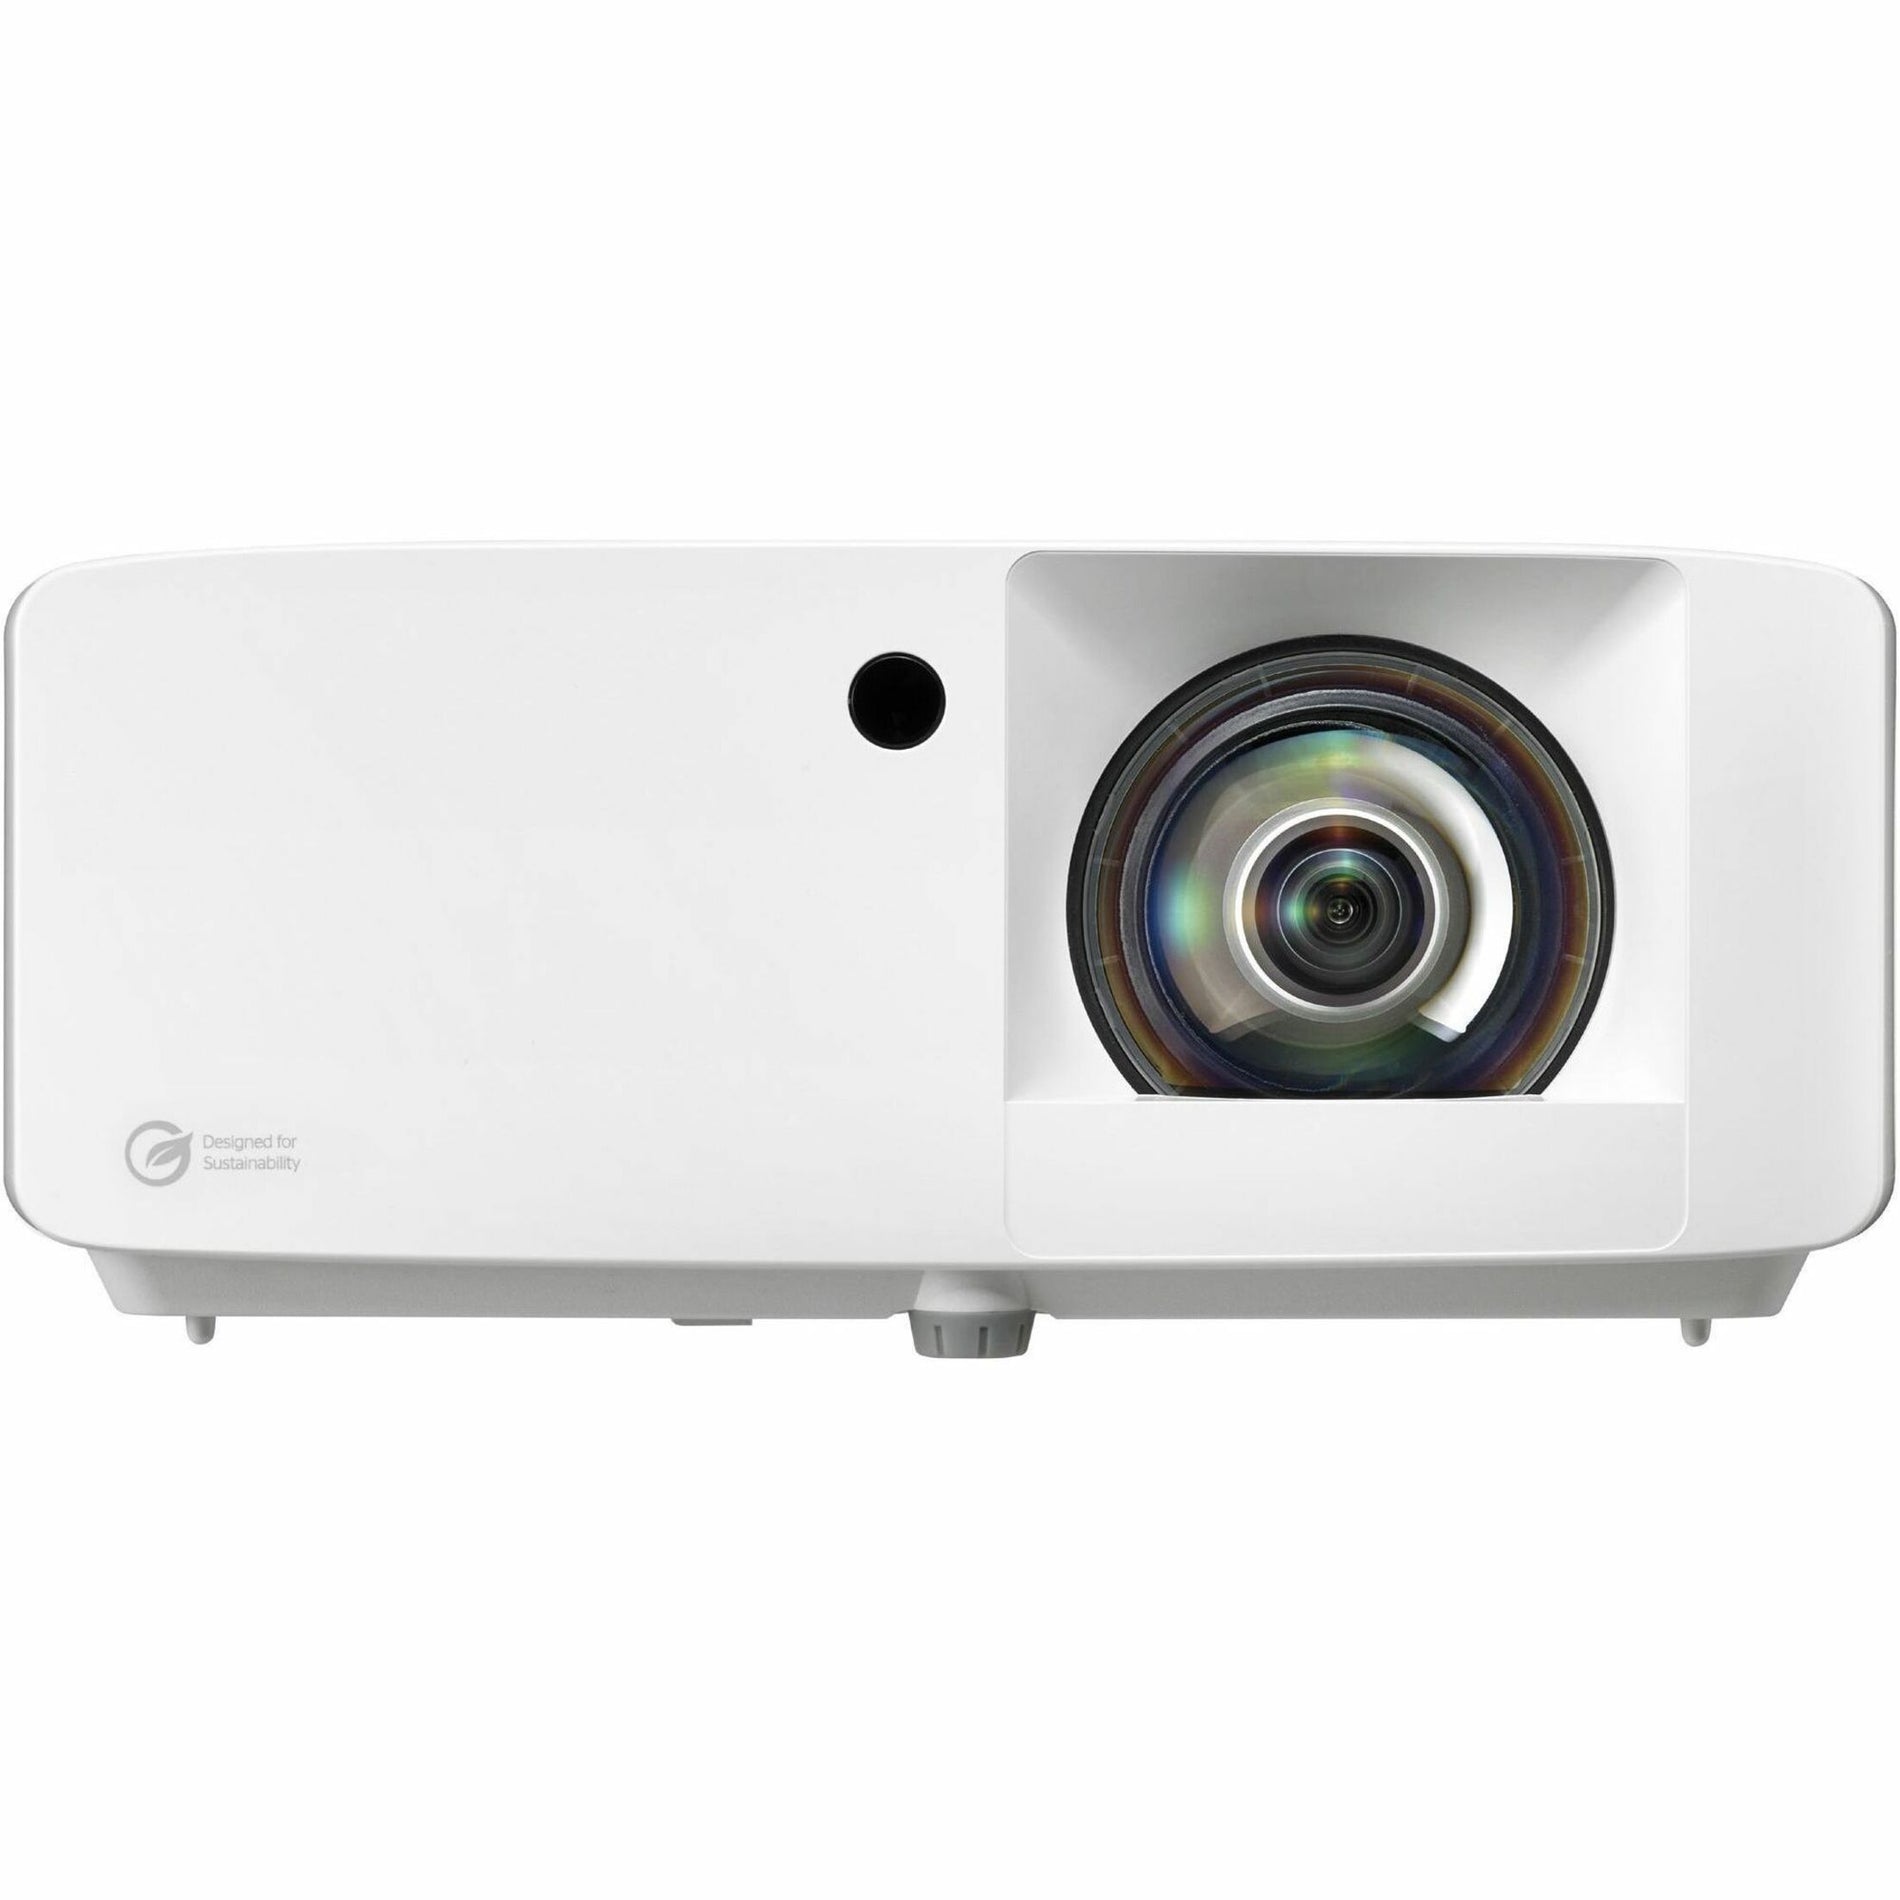 Optoma 4200 lumen 1080p HDR DuraCore Laser DLP projector (GT2100HDR)